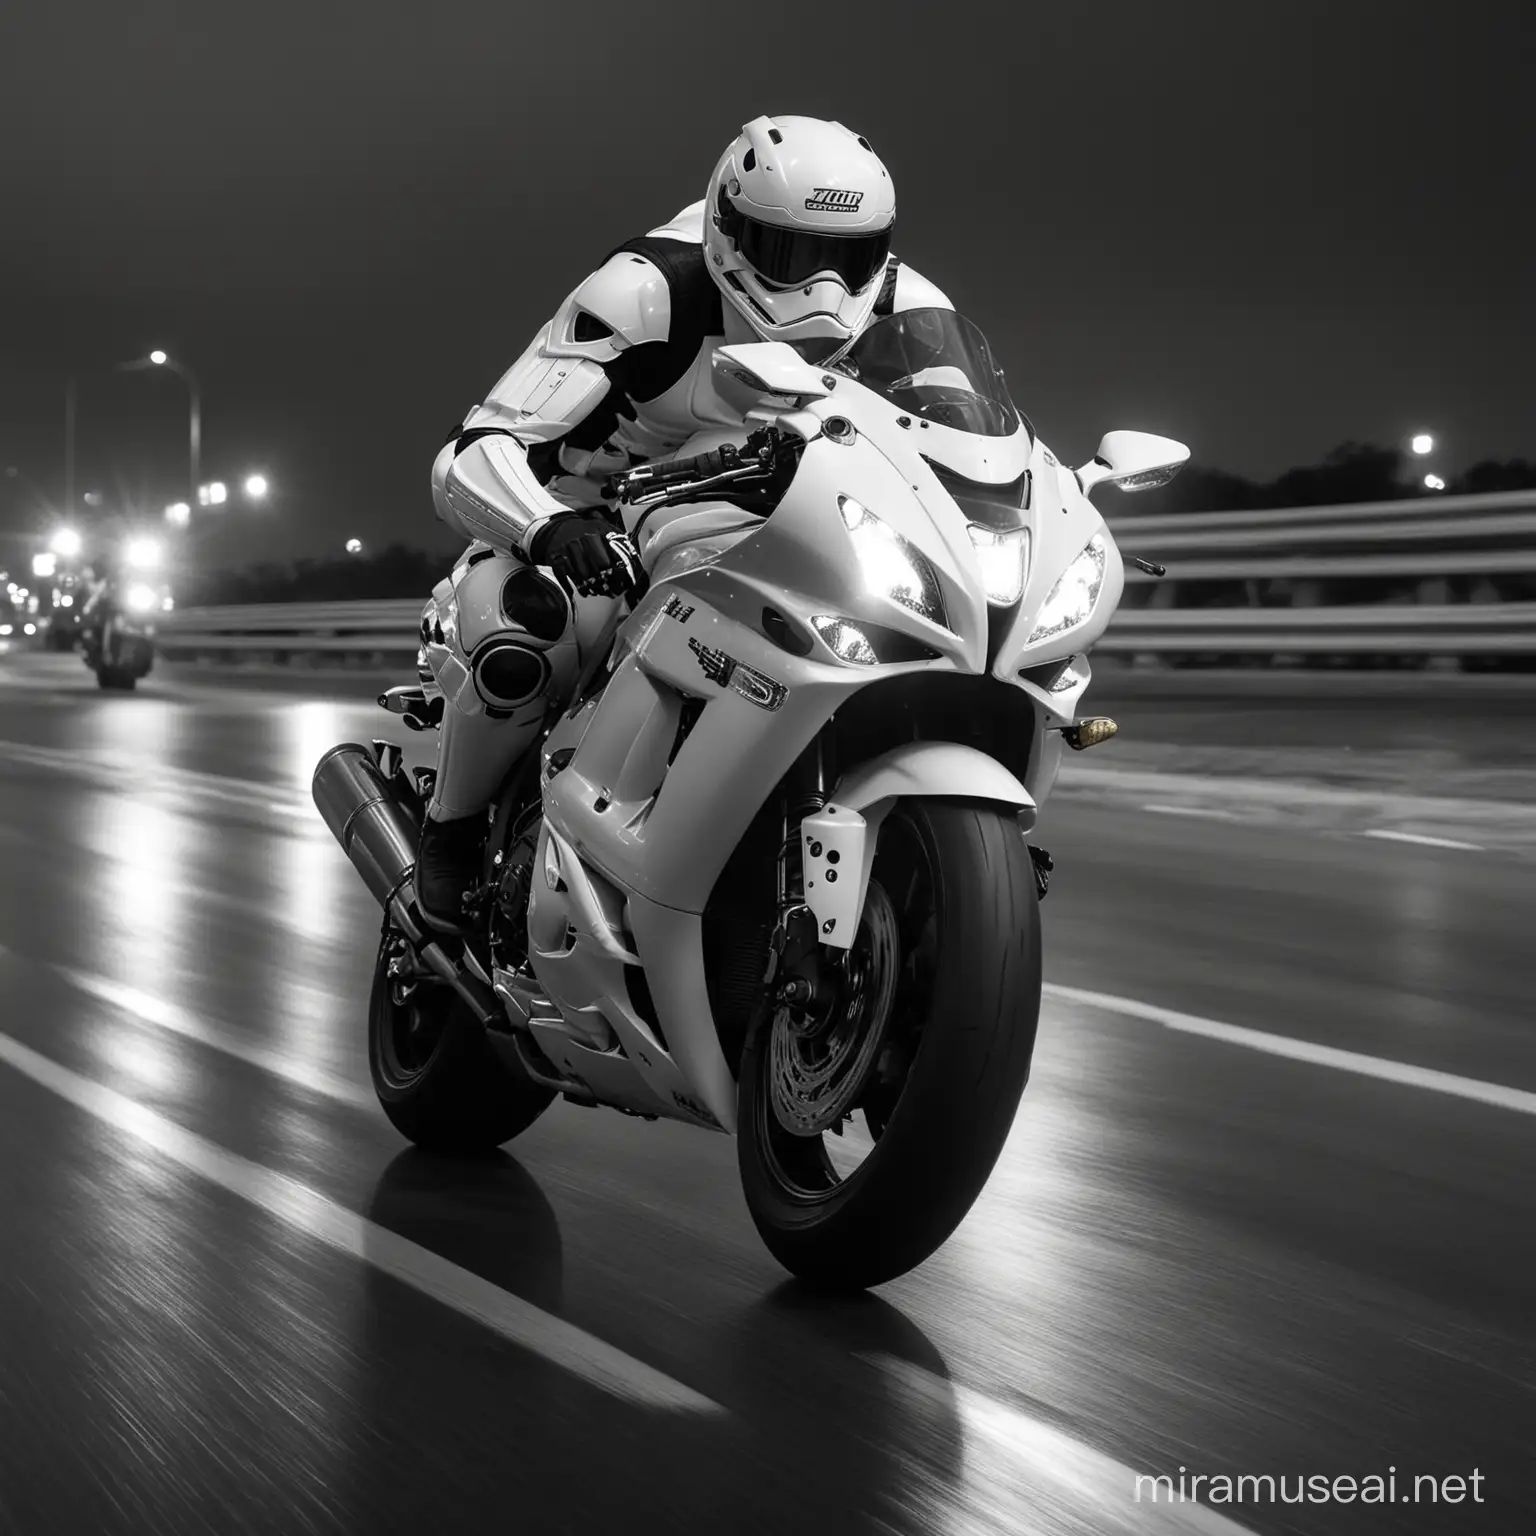 One Storm Trooper doing a wheelie on a white Suzuki Hayabusa while going very fast on an empty highway at night, close-up point of view, front of wheel of the bike elevated from the ground, photo completely in black and white, dramatic style, blurred background, biker in full Storm Trooper armor, bike doing 200 mph, no colors, 1/10s shutter speed
